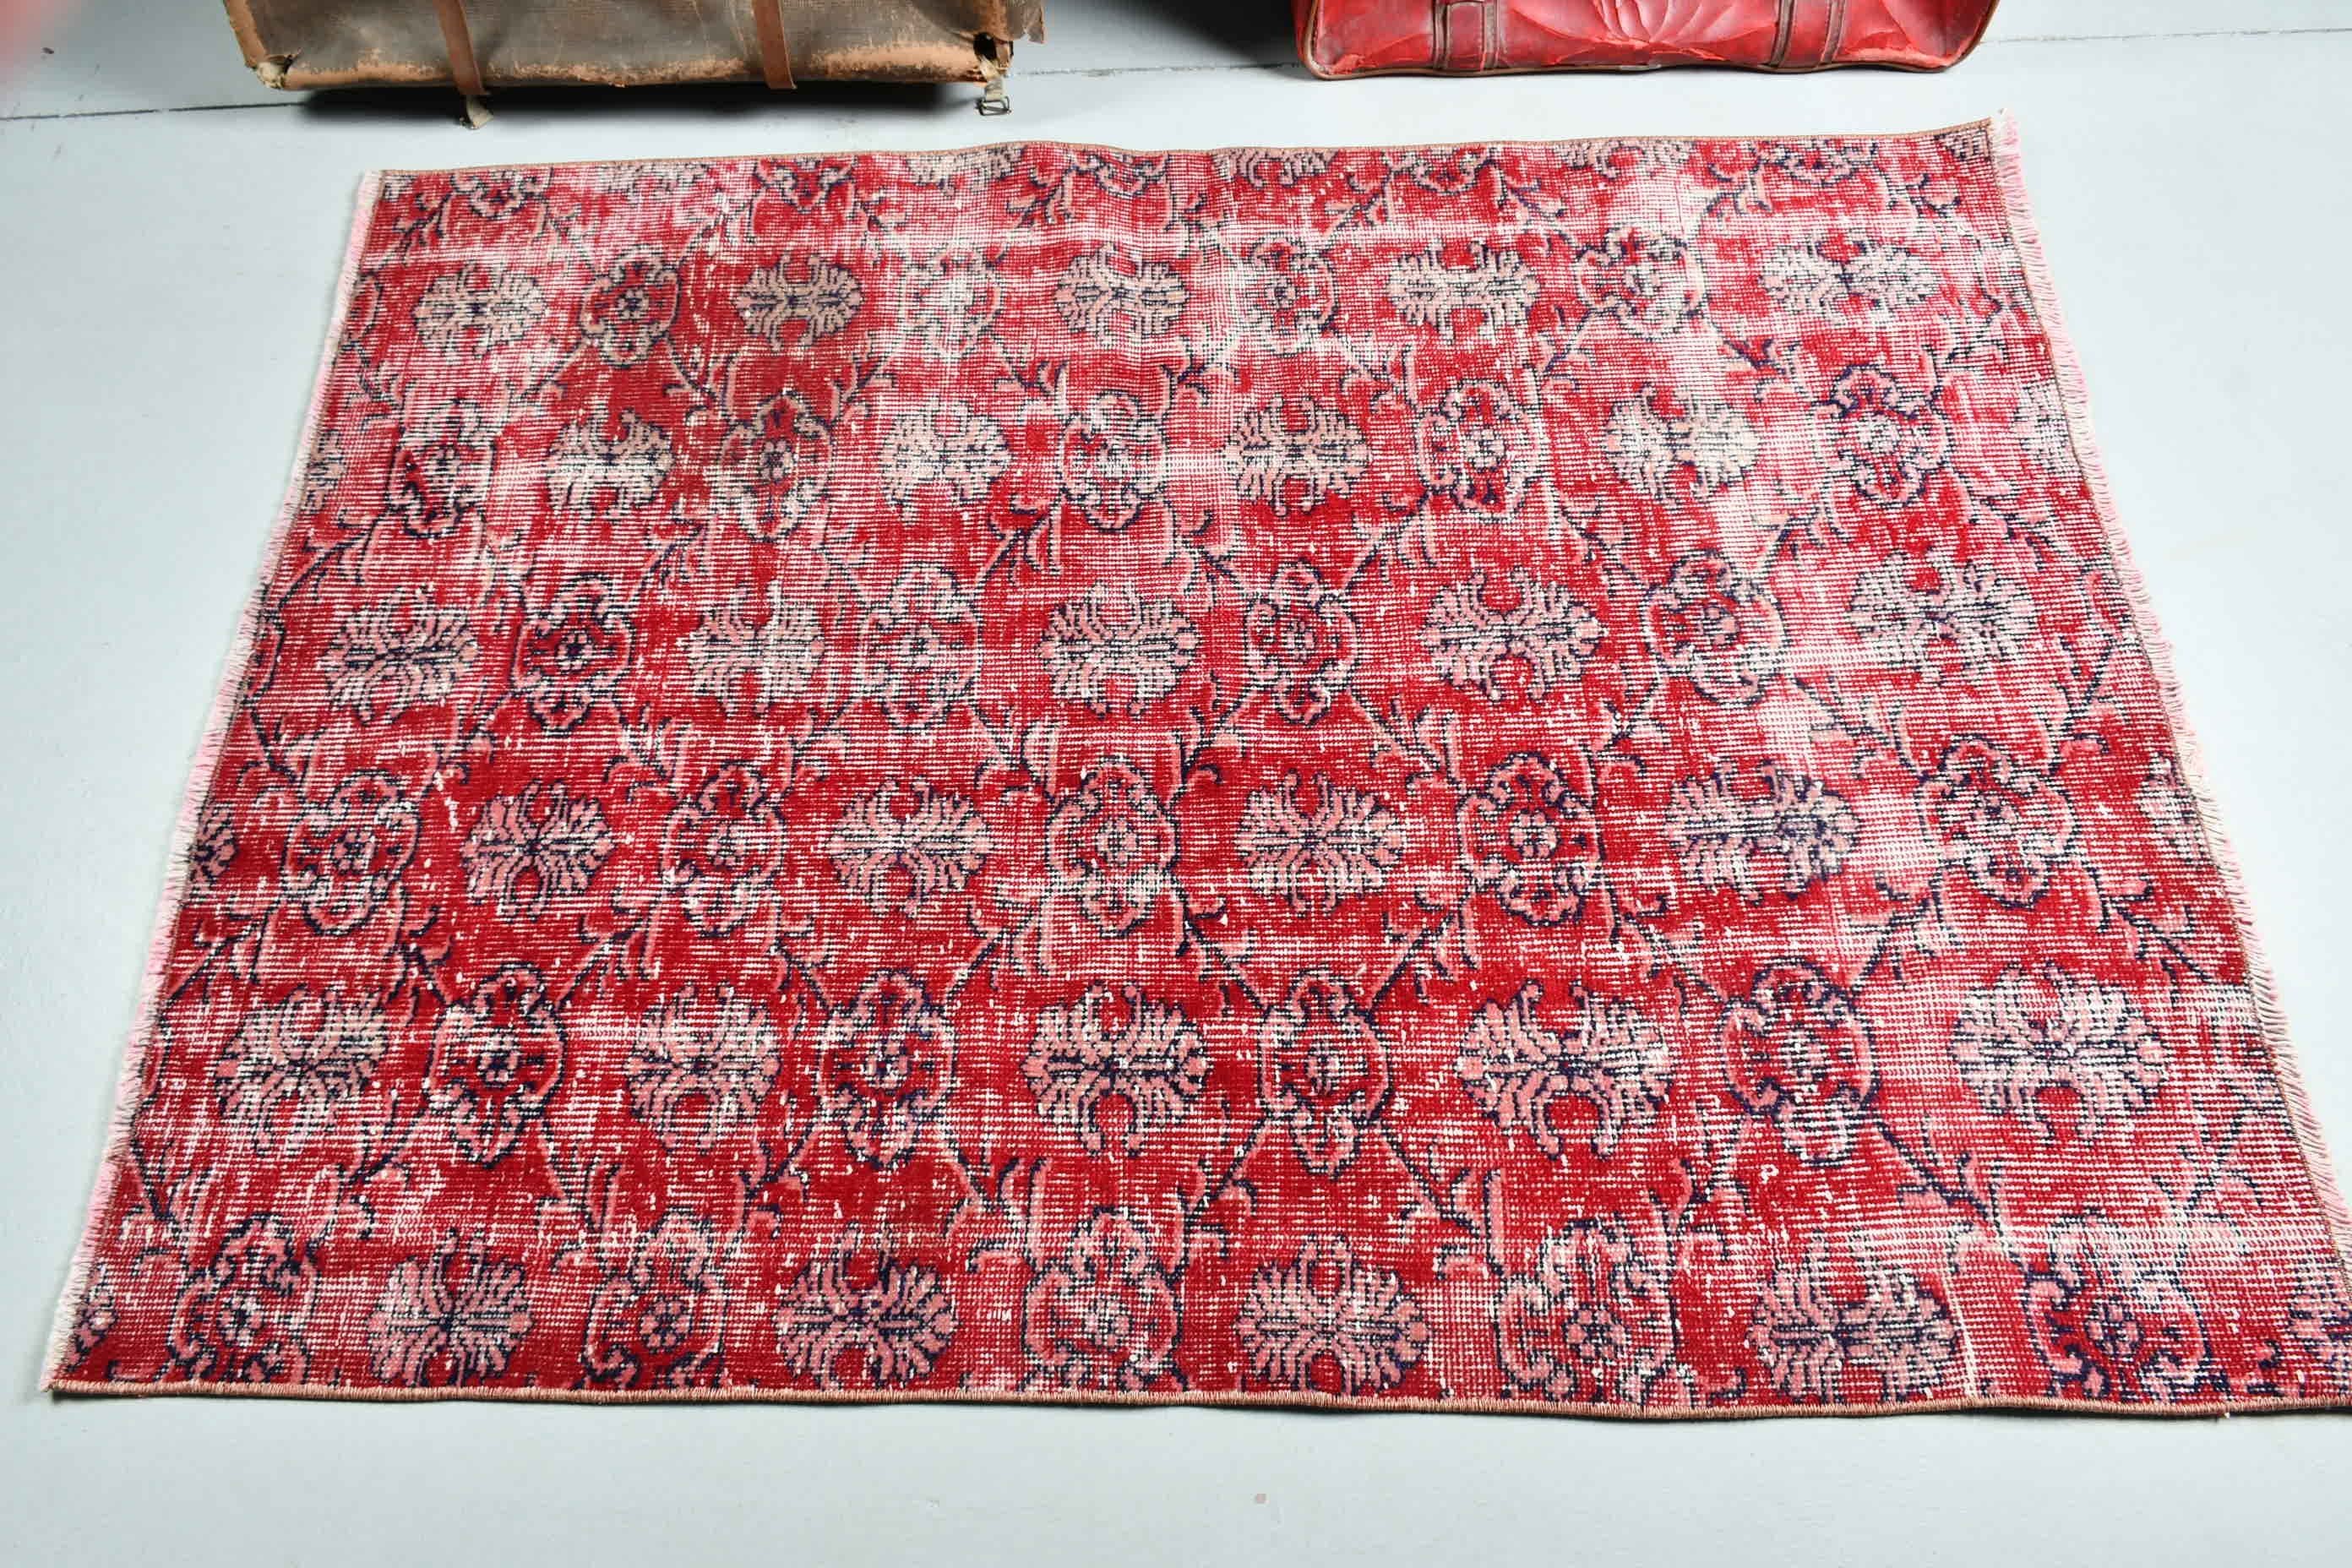 Turkish Rug, Vintage Rugs, Oriental Rug, Rugs for Nursery, Kitchen Rugs, Nursery Rug, Red Oriental Rugs, Entry Rug, 3.6x4.9 ft Accent Rug